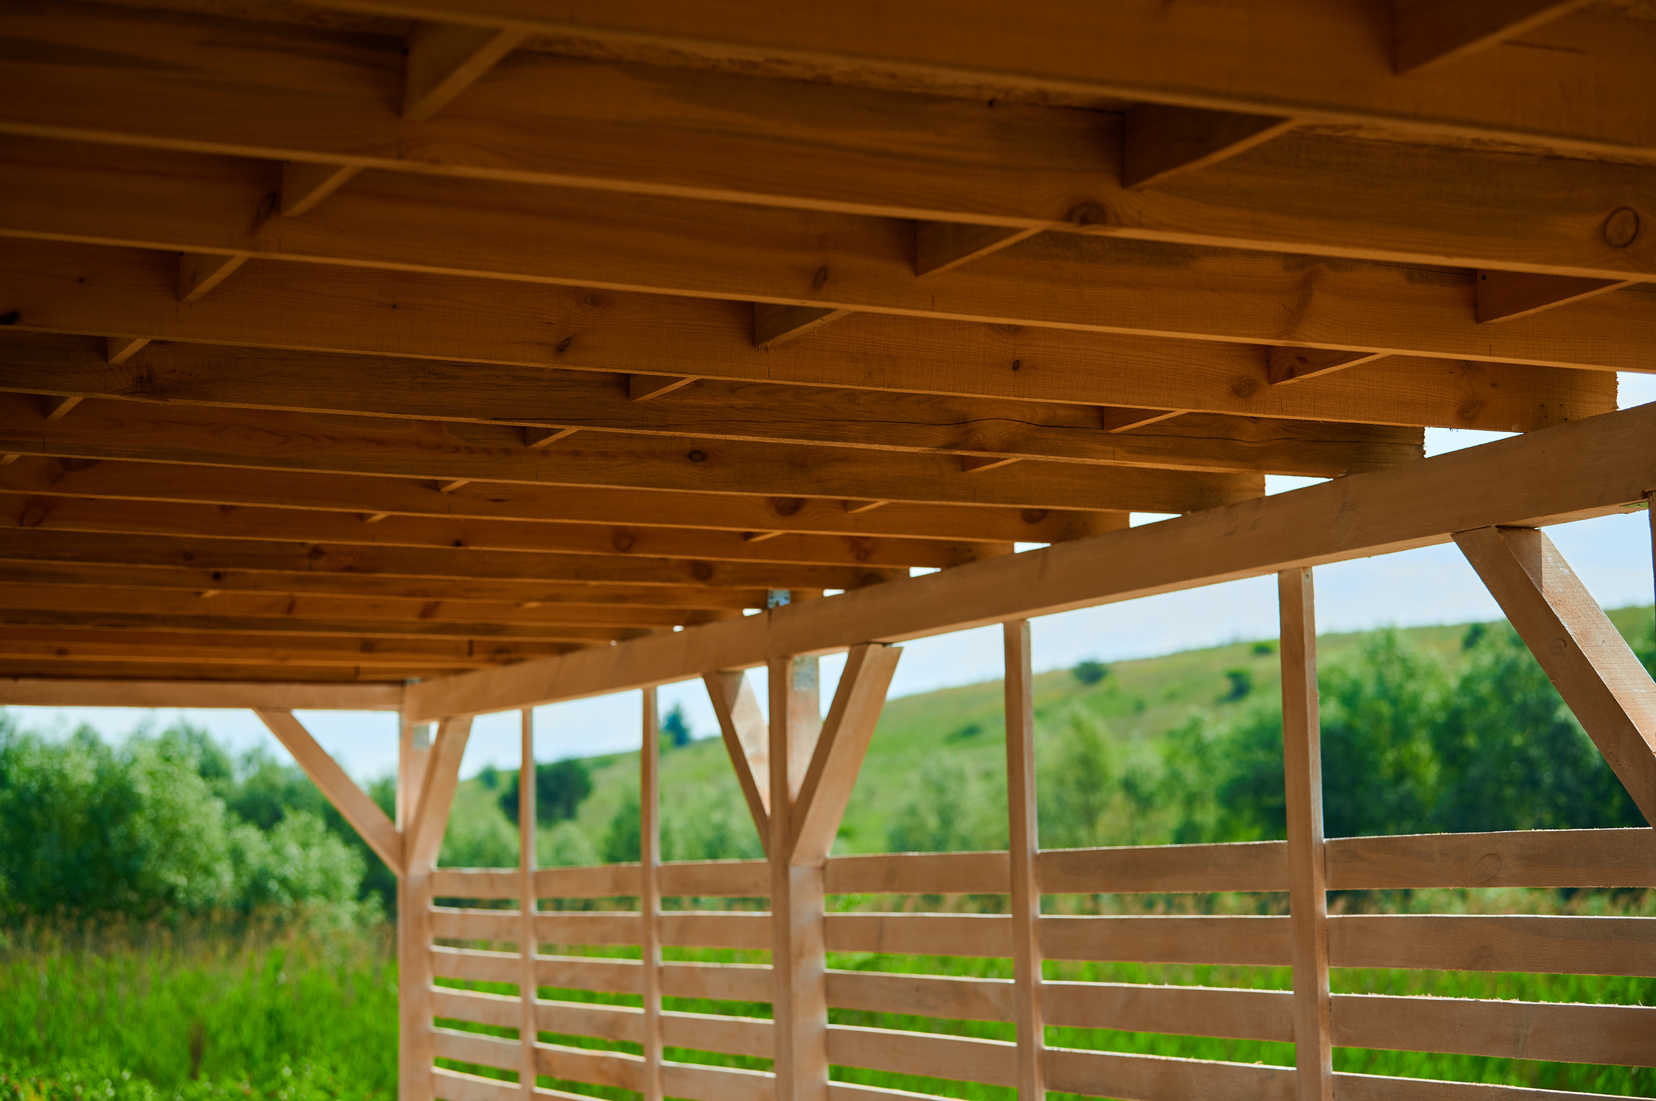 Roof of beams gazebo under a canopy